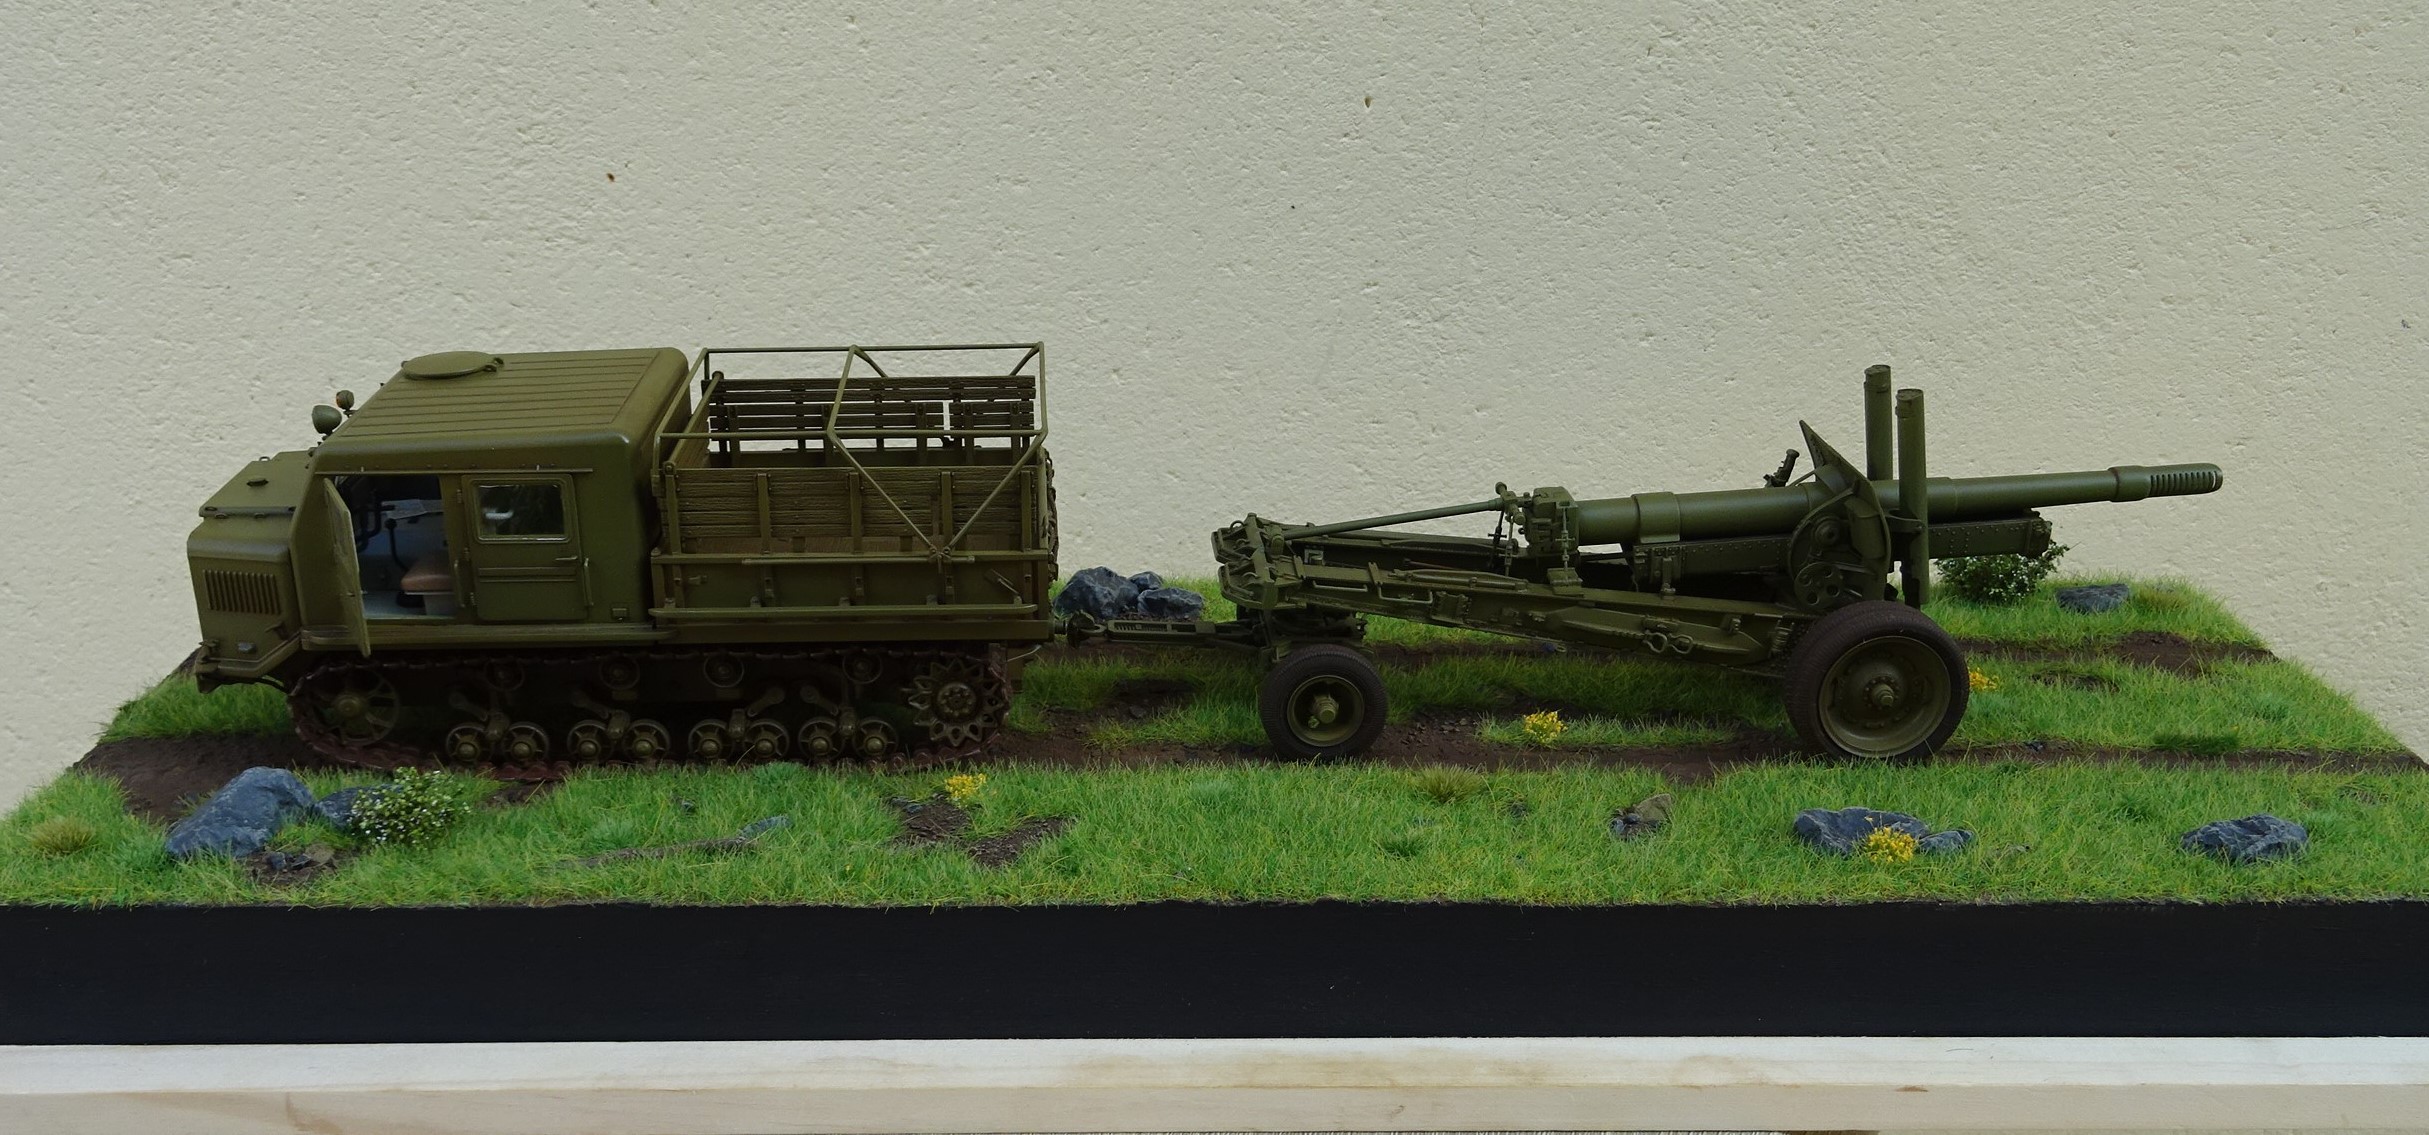 Fil rouge 2022 / CCCP * AT-S Tractor & ML-20 152 mm Howitzer Mofd1937 1/35 ( Trumpeter 09514) *** Terminé en pg 6 - Page 6 Dsc00151